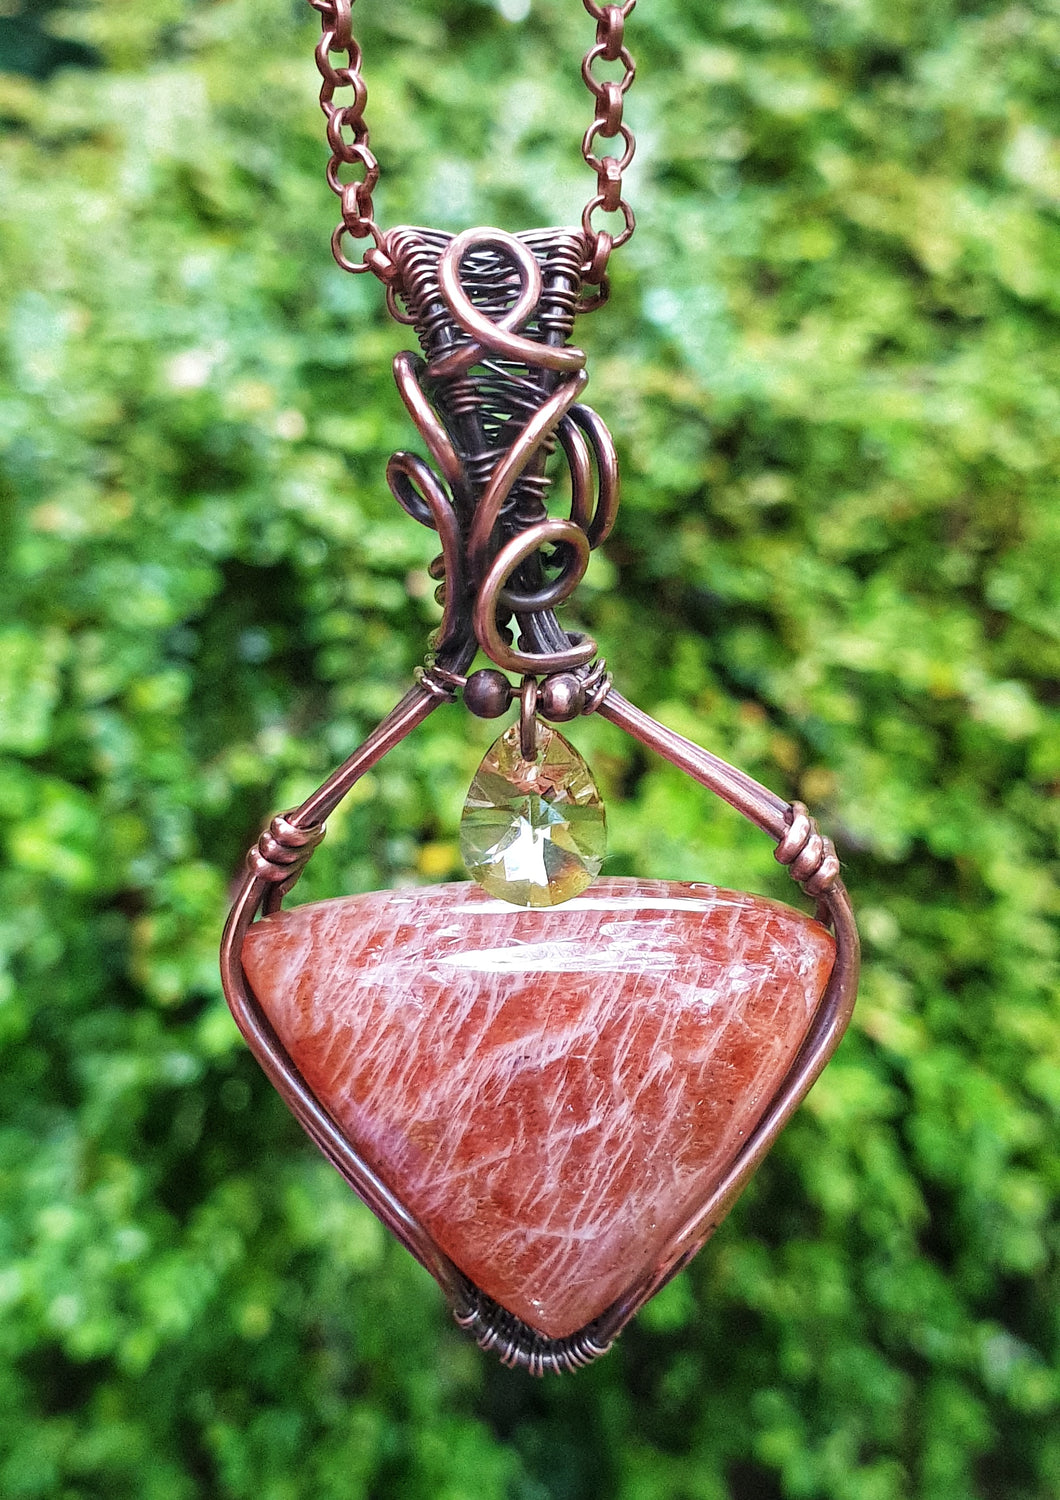 Curved Triangular Shape Orange Confetti Sunstone Gemstone with a Dangling Swarovski Crystal Bead Wrapped in Pure Copper Wire Pendant/Necklace